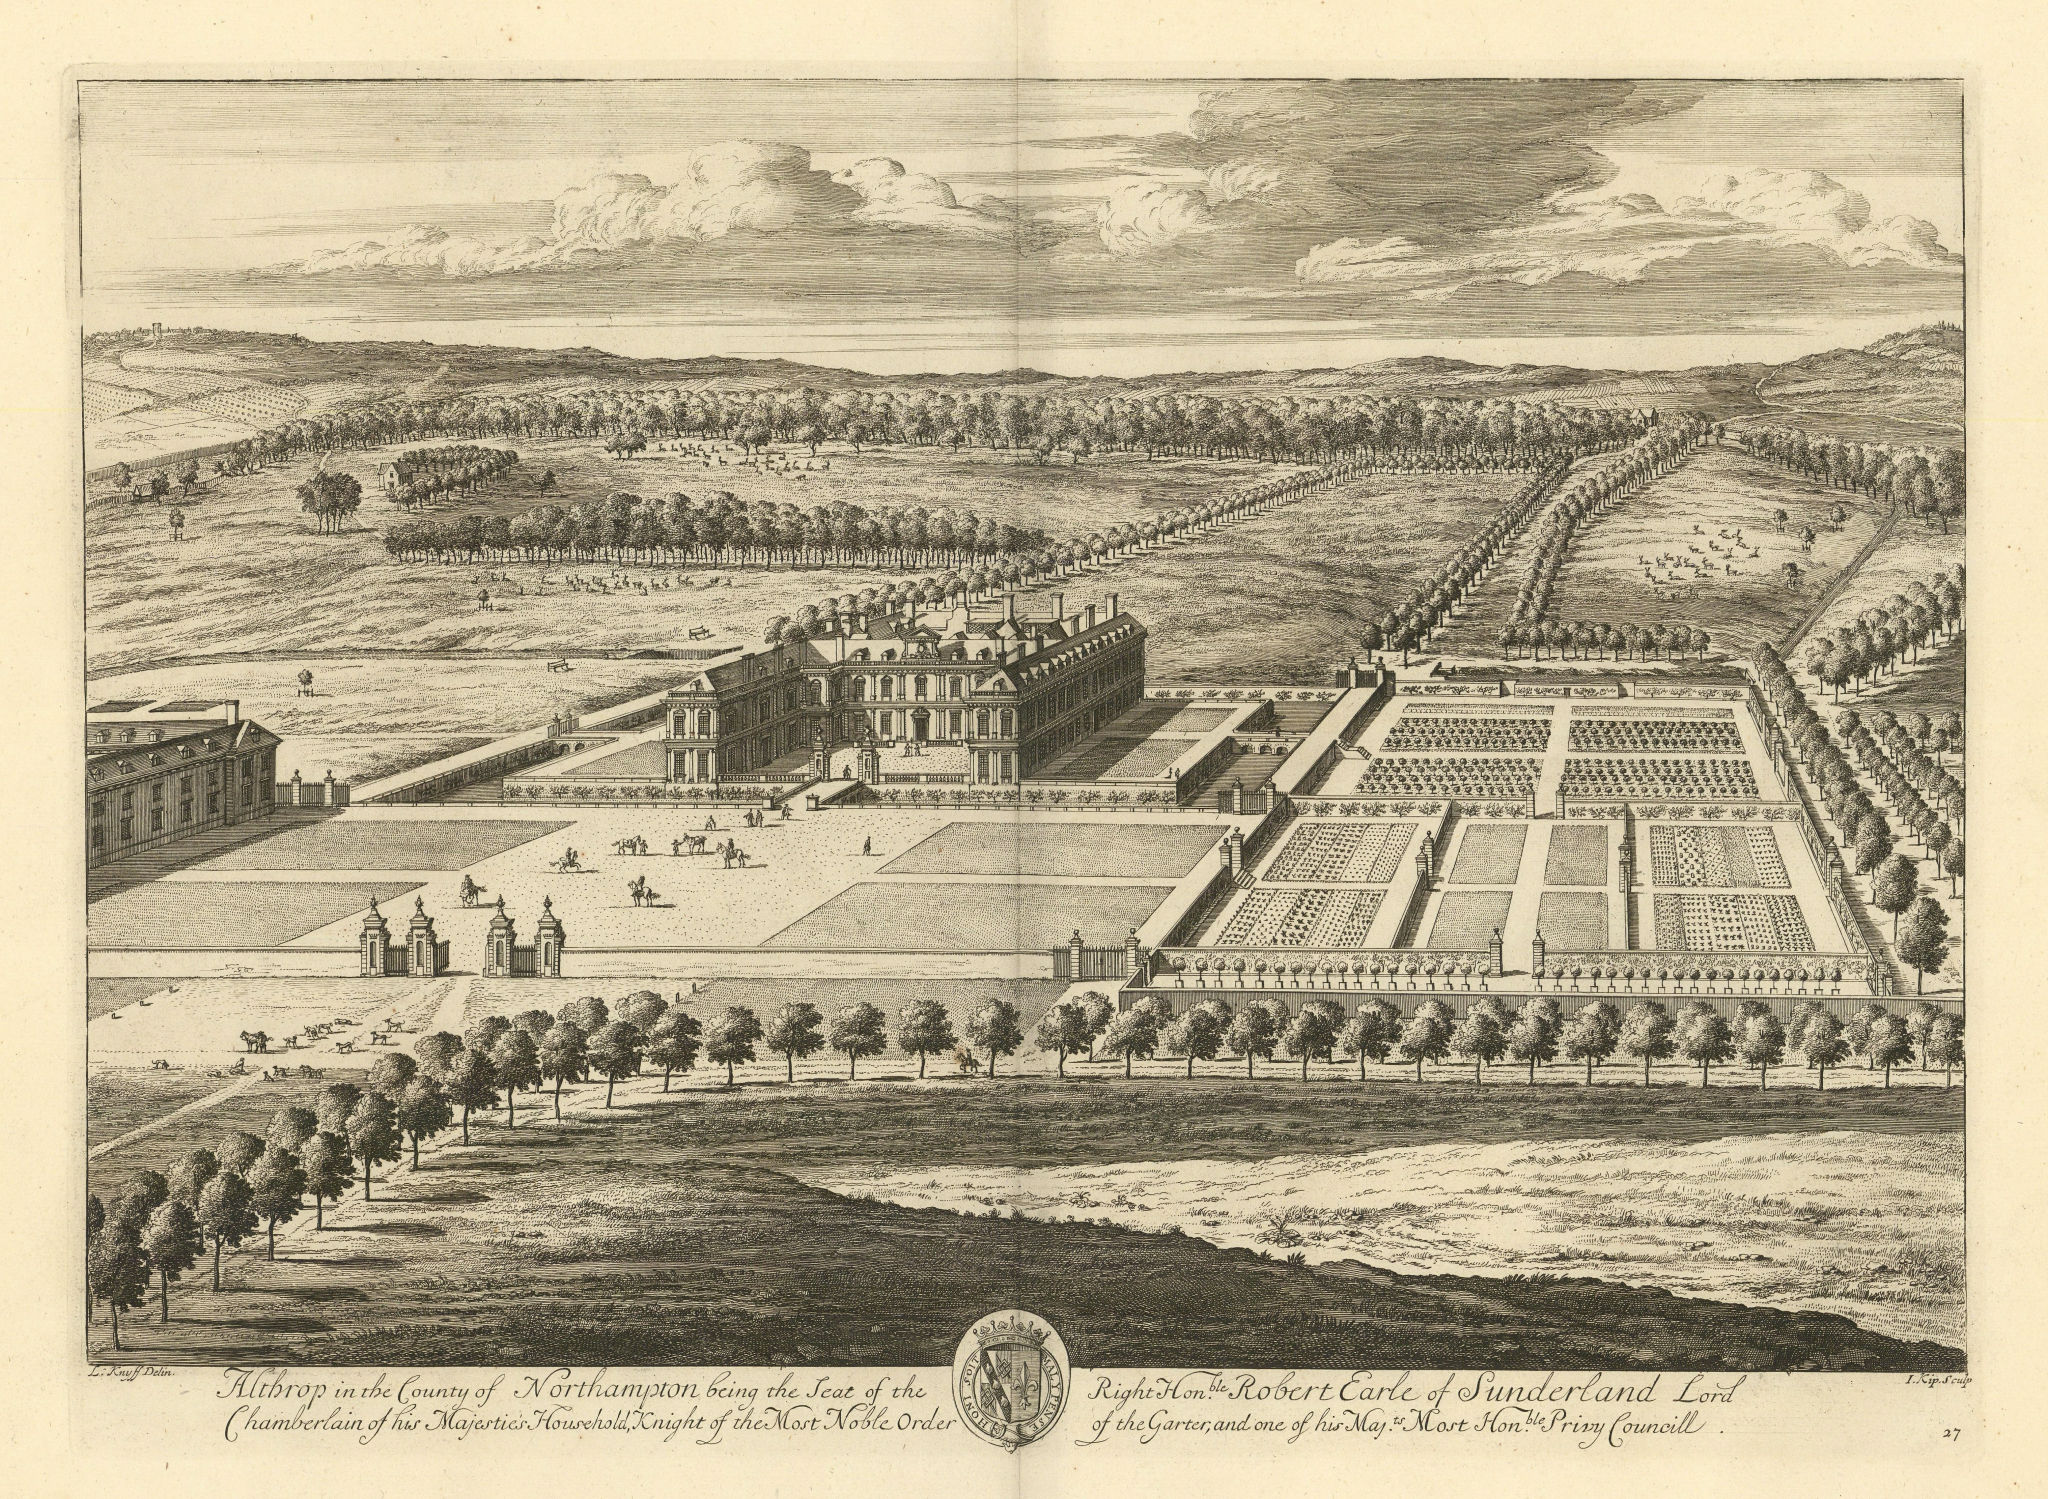 Associate Product Althorp House & Estate by Kip/Knyff. "Althrop in the County of Northampton" 1709